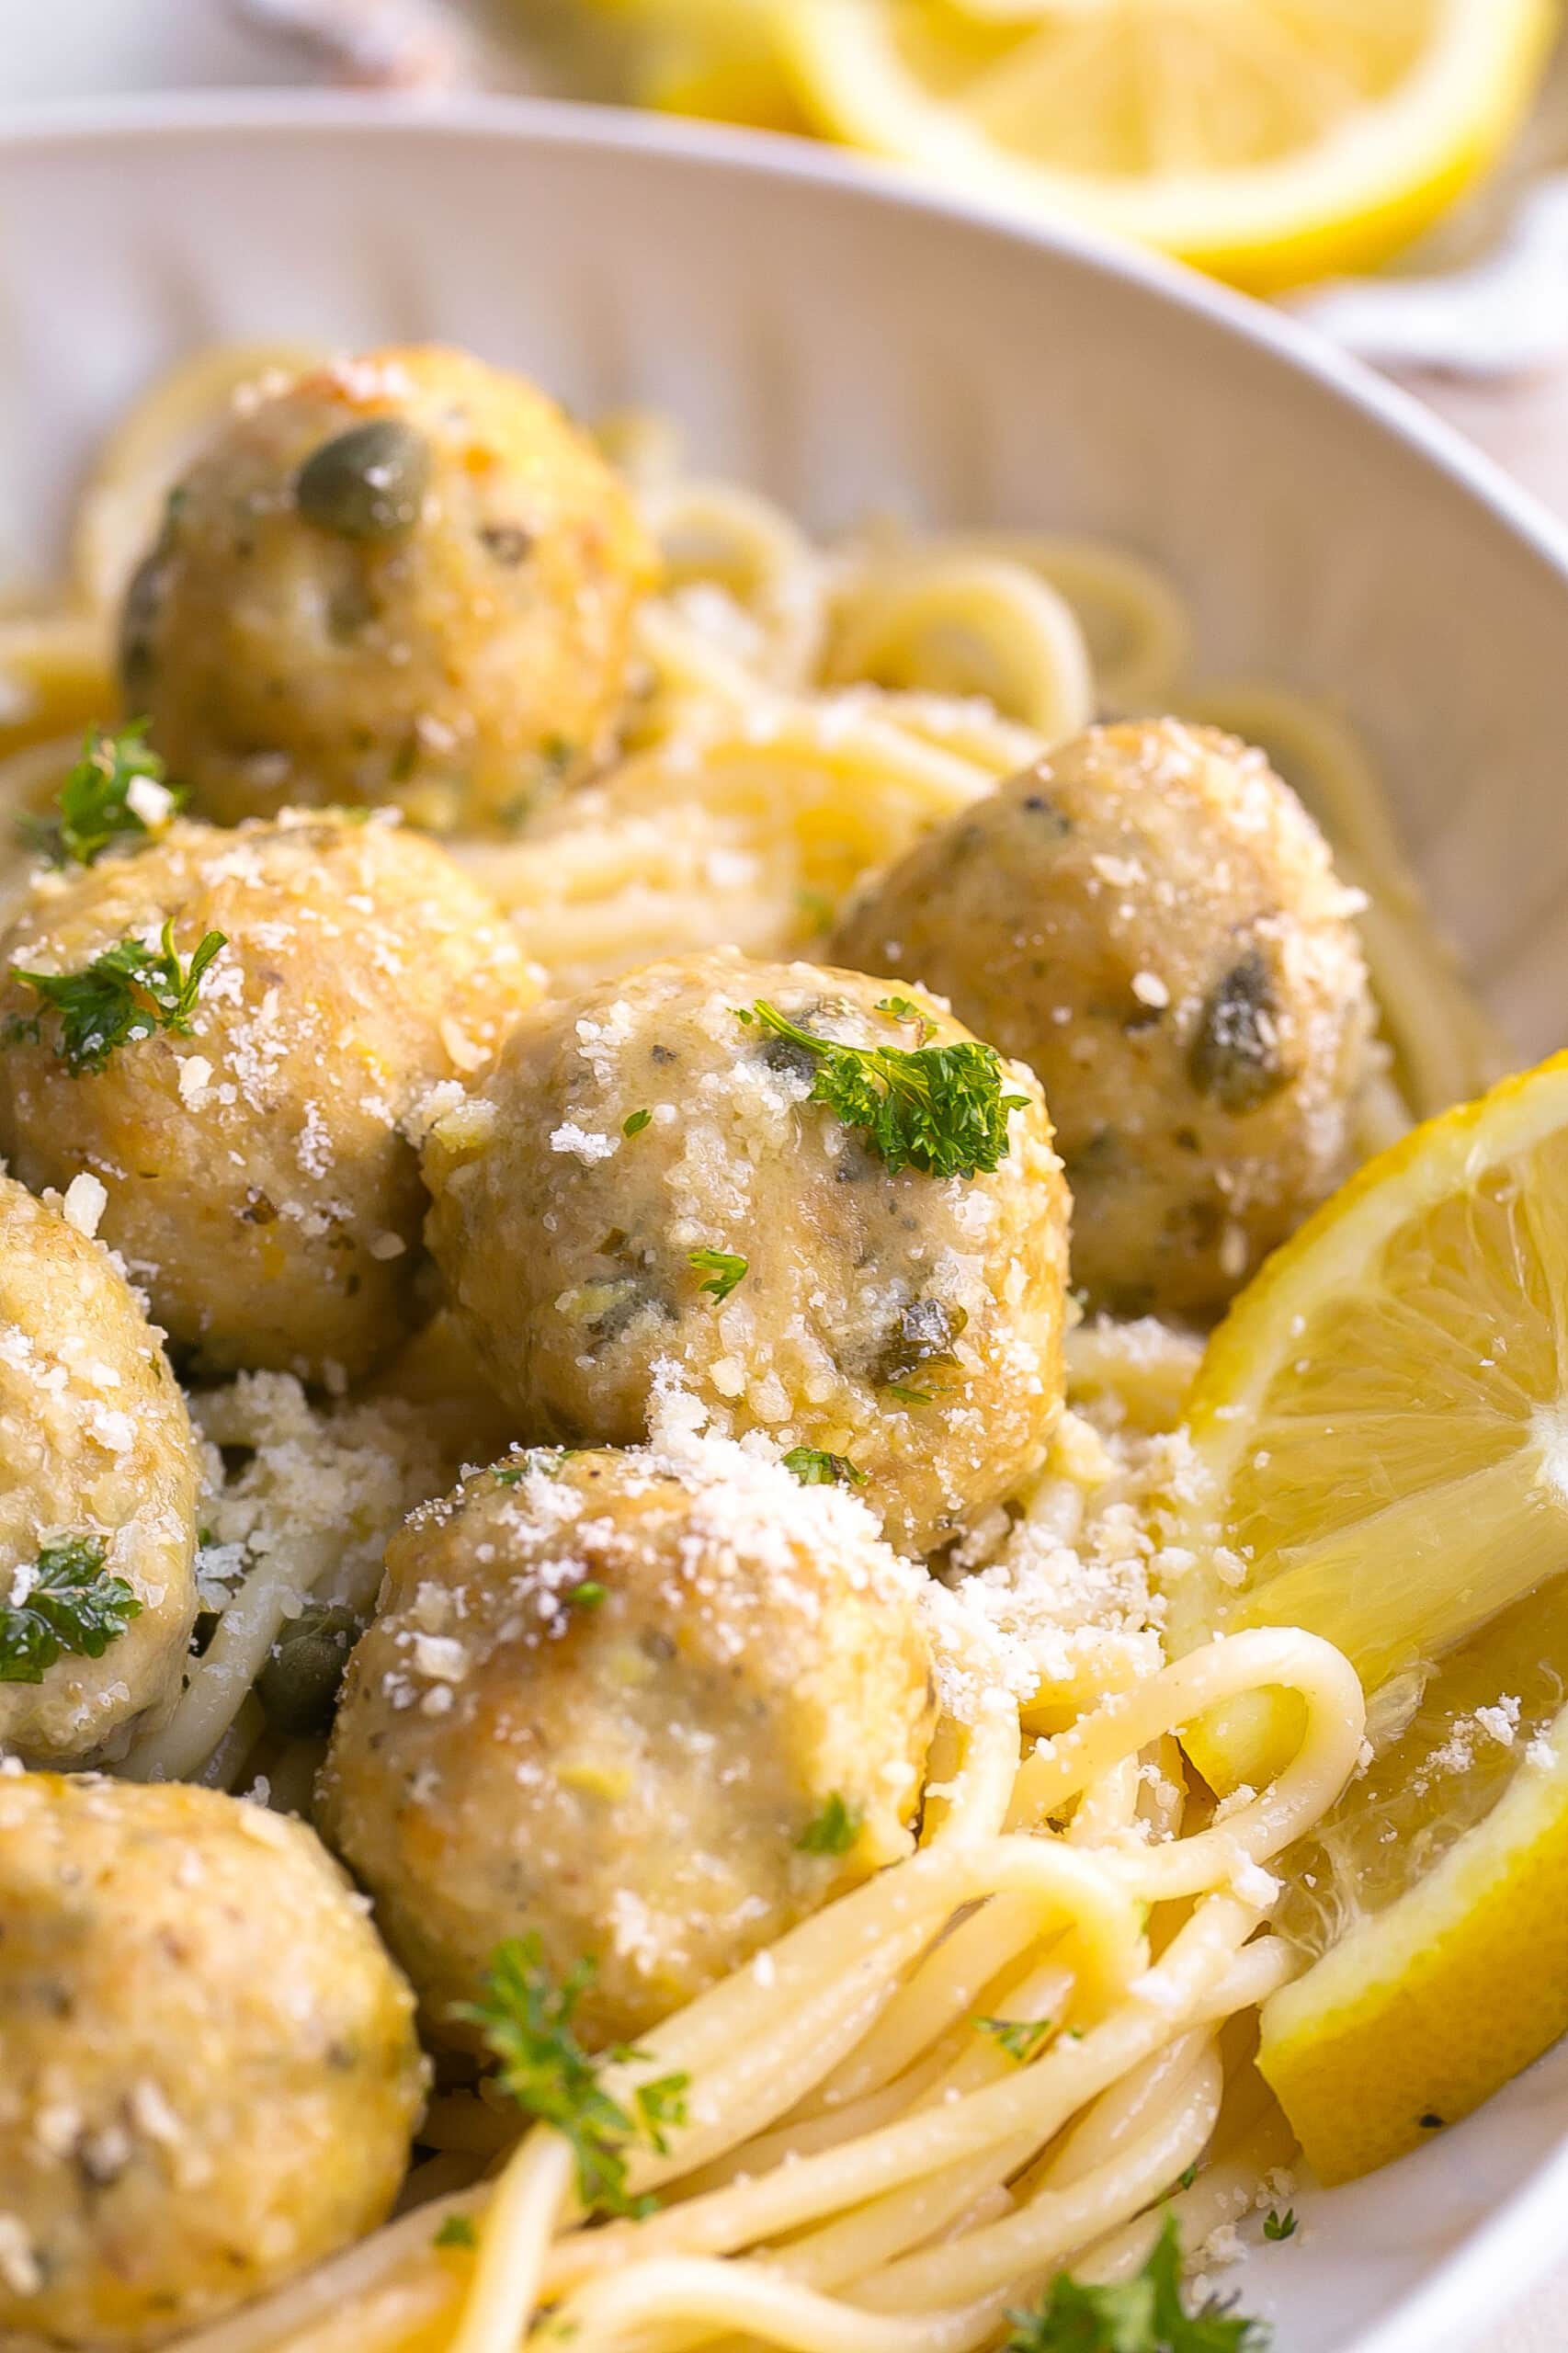 Meatballs and pasta in a bowl.